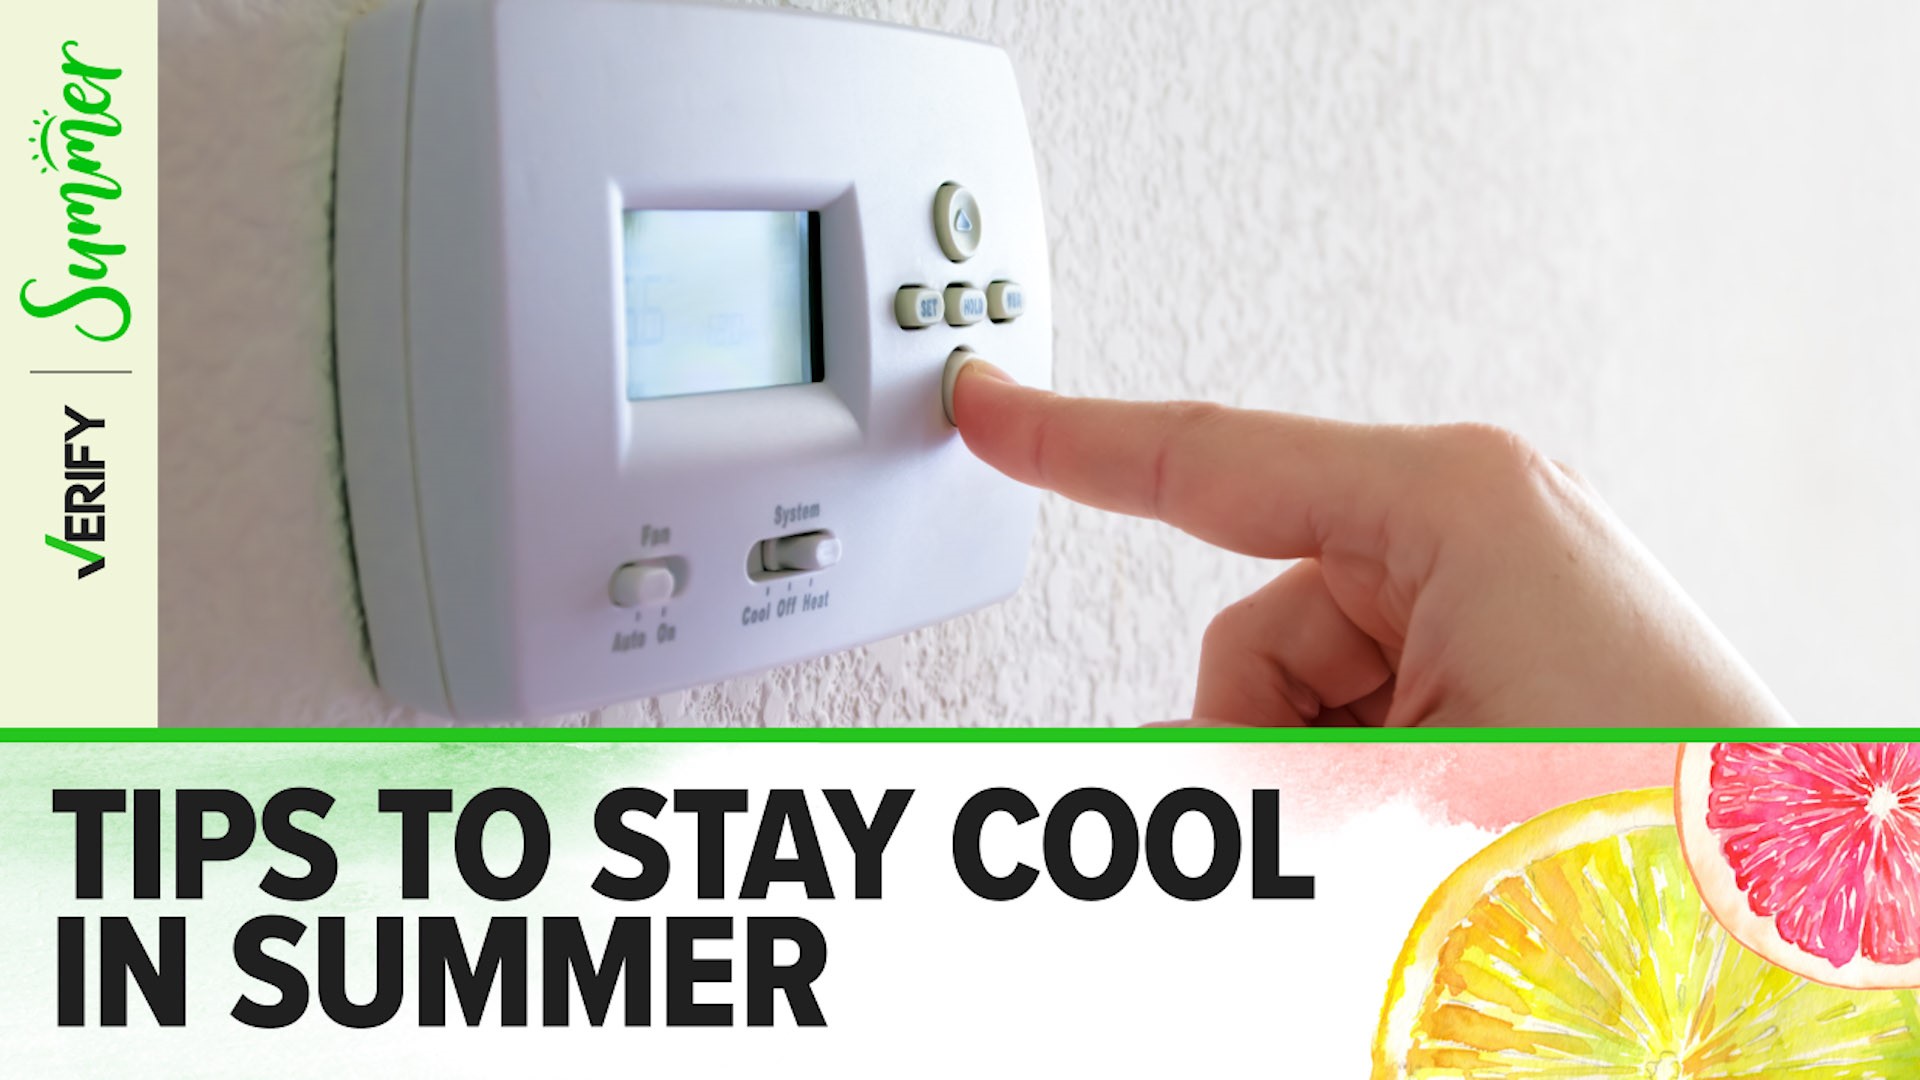 Here are five verified ways to help you save energy and beat the heat this summer.